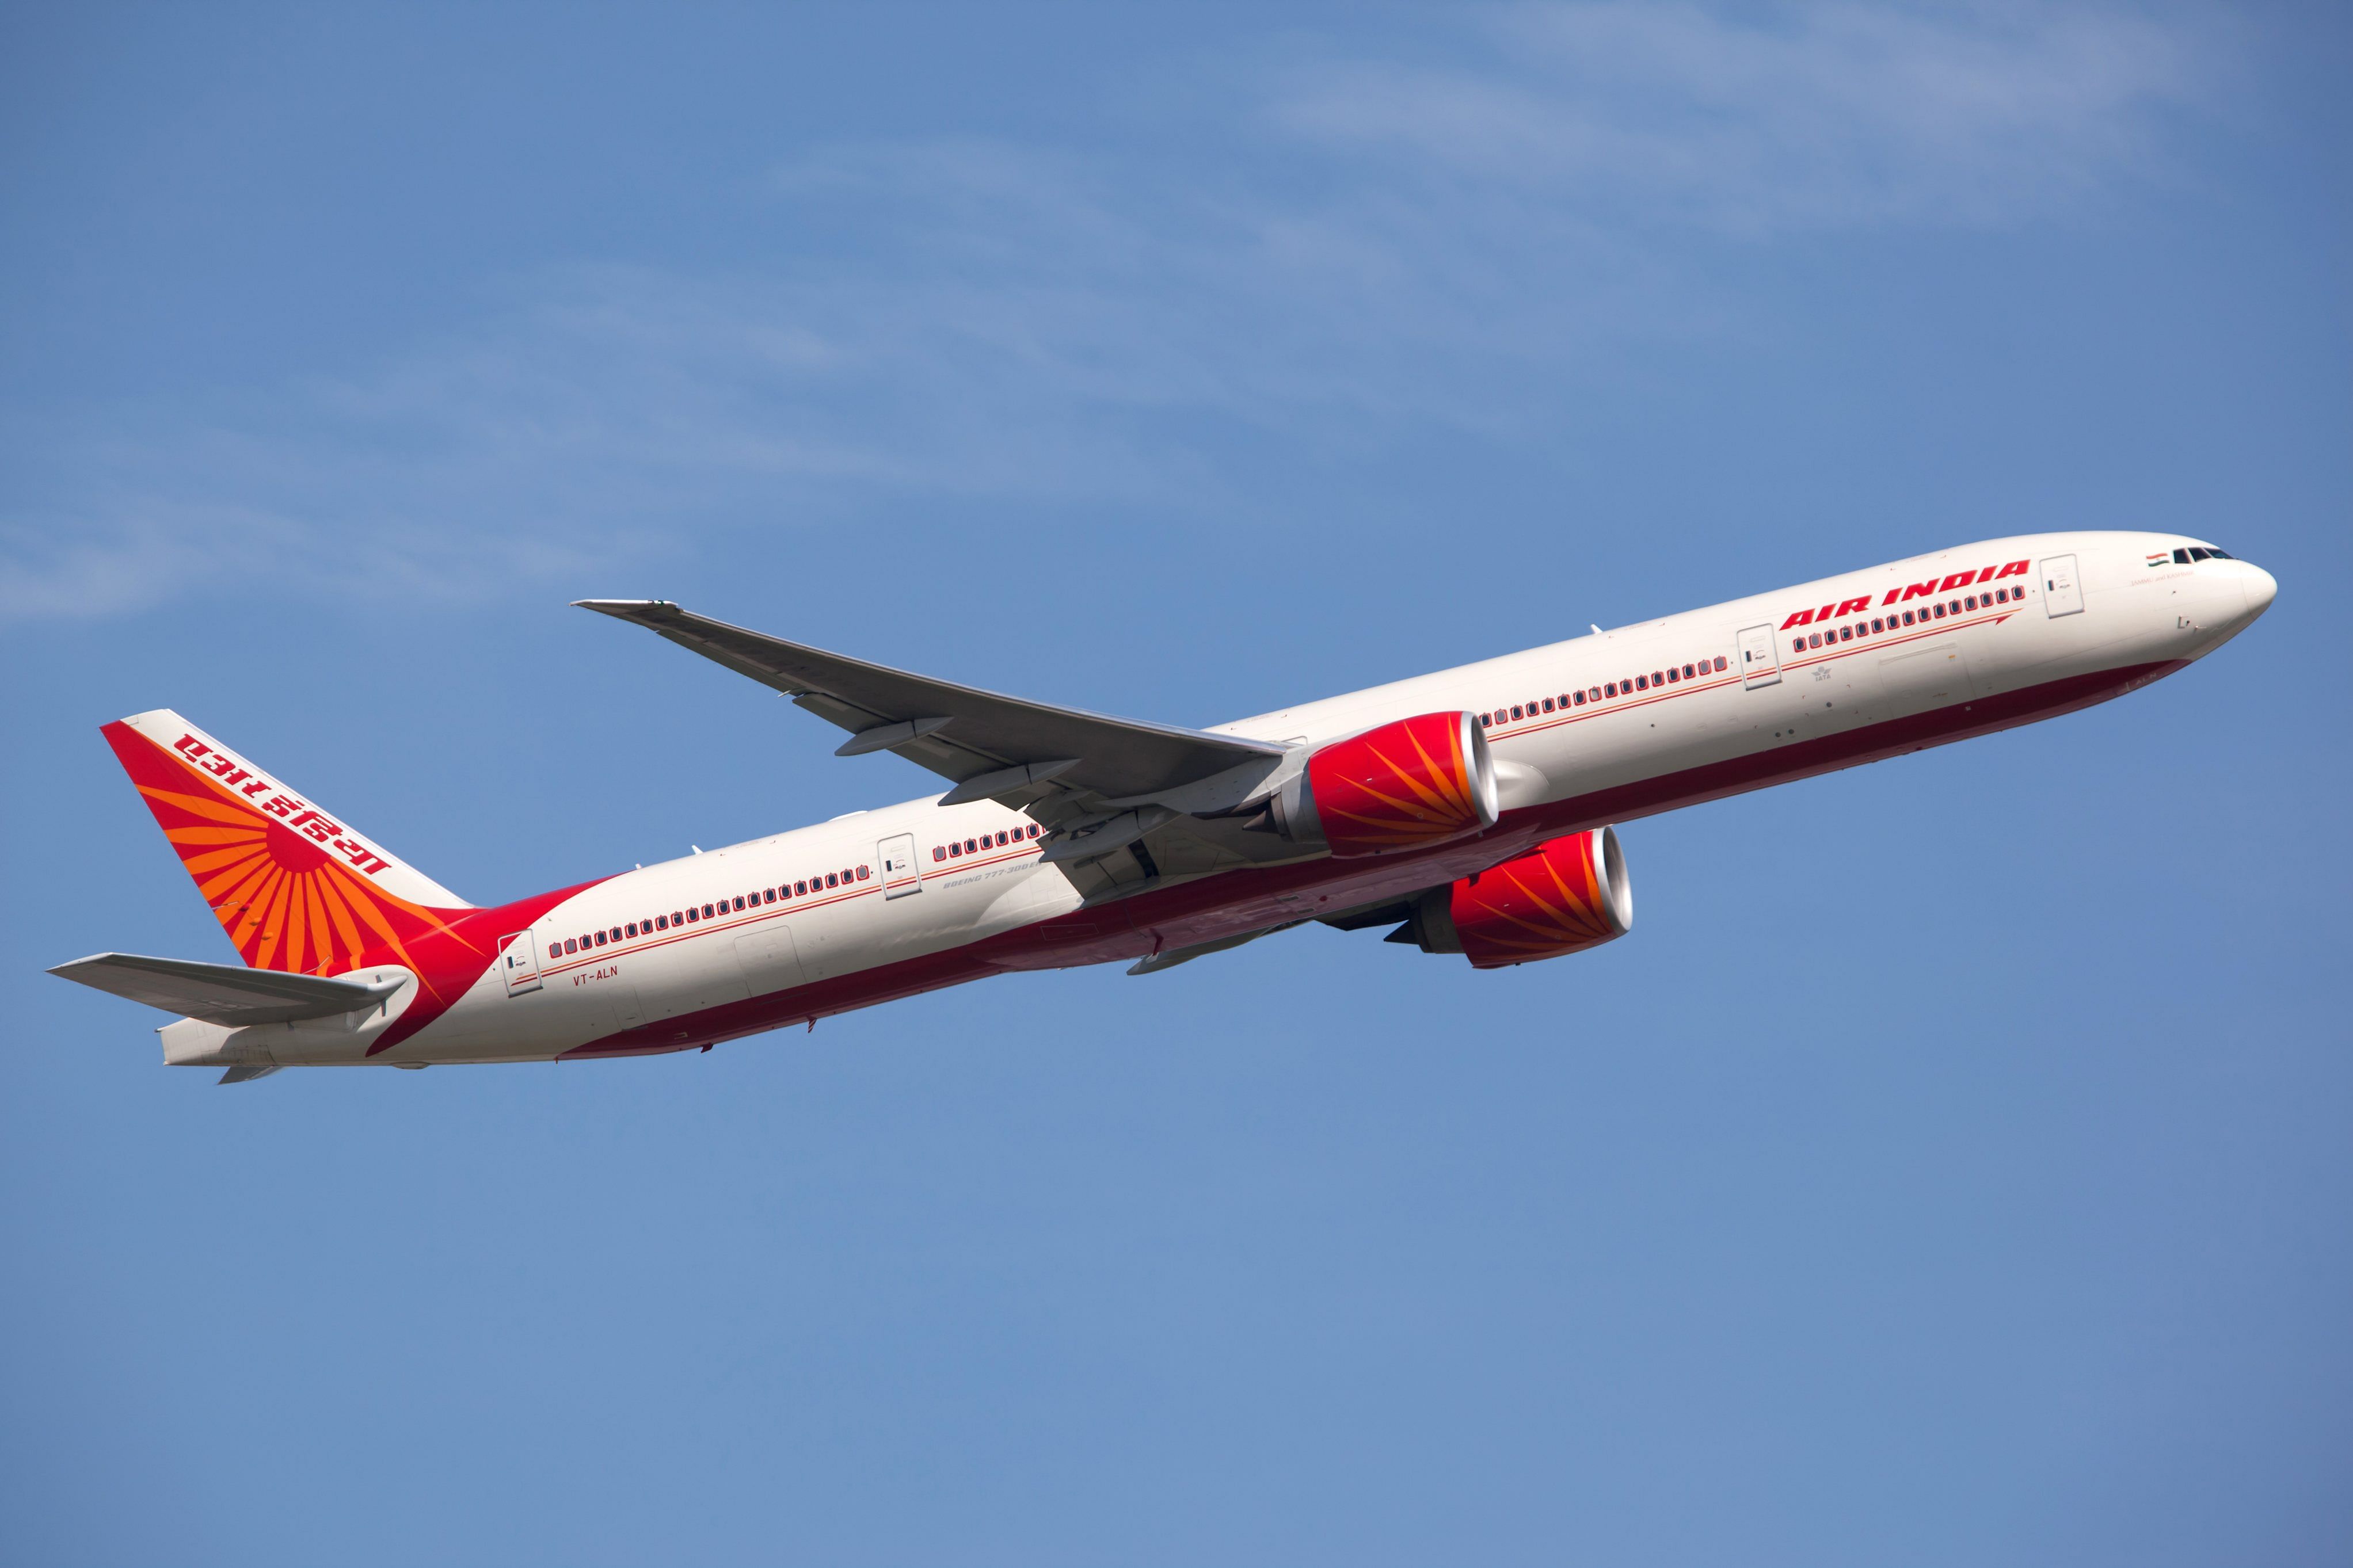 Representatives of various Air India trade unions will meet here to discuss the government's privatisation plans, sources said. Credit: iSTOCK image